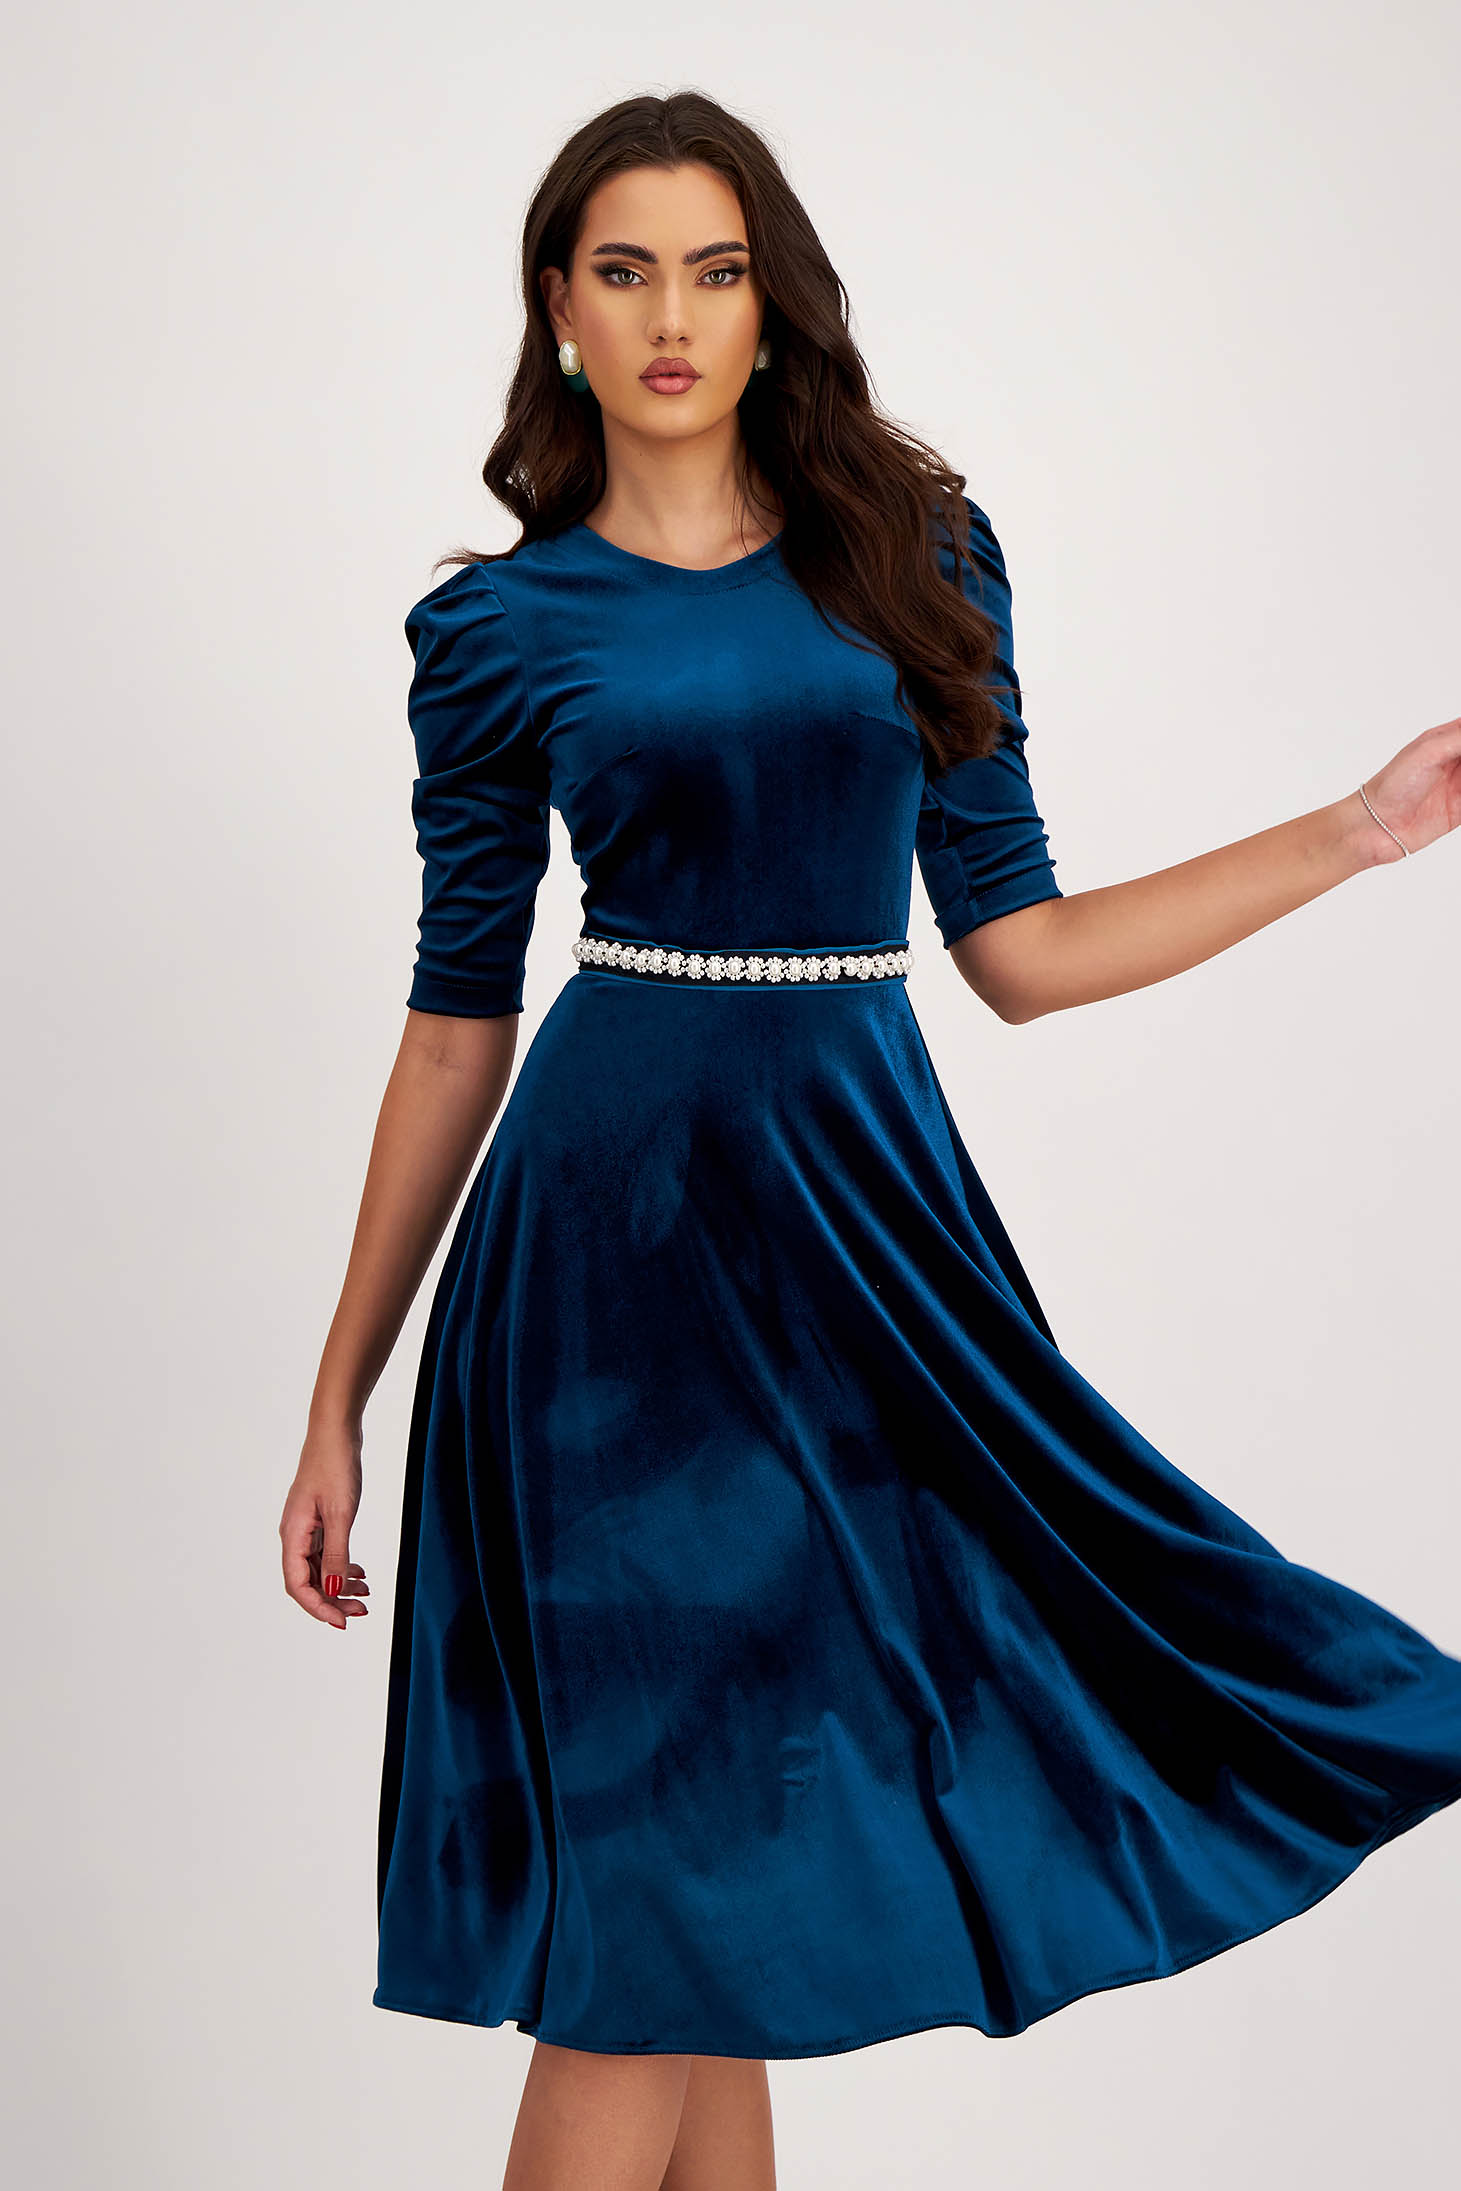 Petrol Blue Velvet Dress in A-line with Puff Shoulders and Pearl Appliqués on the Drawstring - StarShinerS